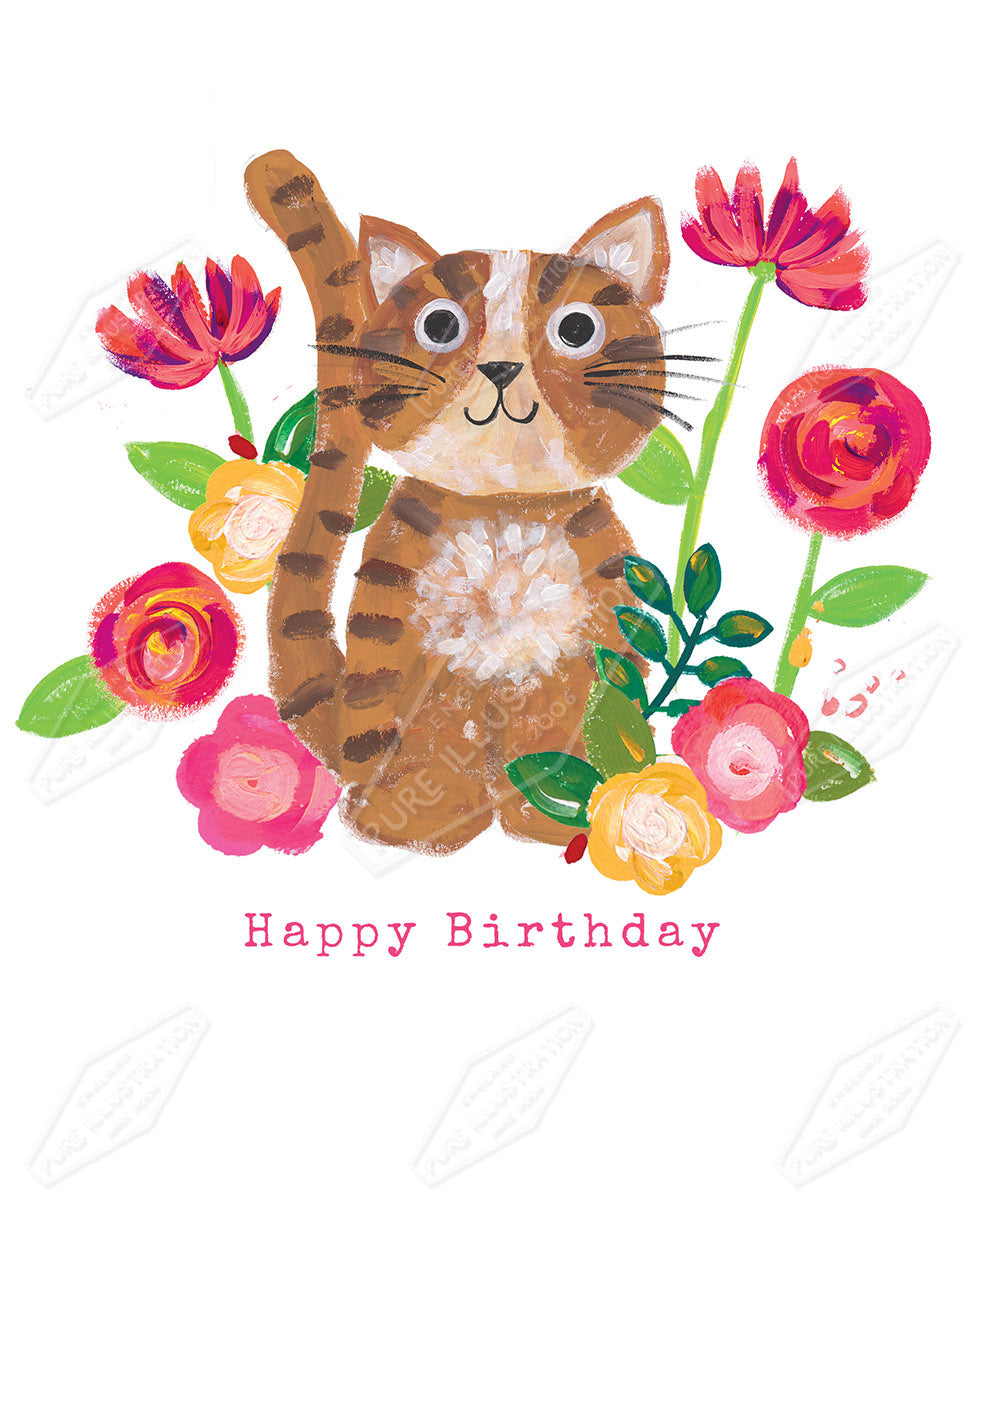 00033499KSP- Kerry Spurling is represented by Pure Art Licensing Agency - Birthday Greeting Card Design